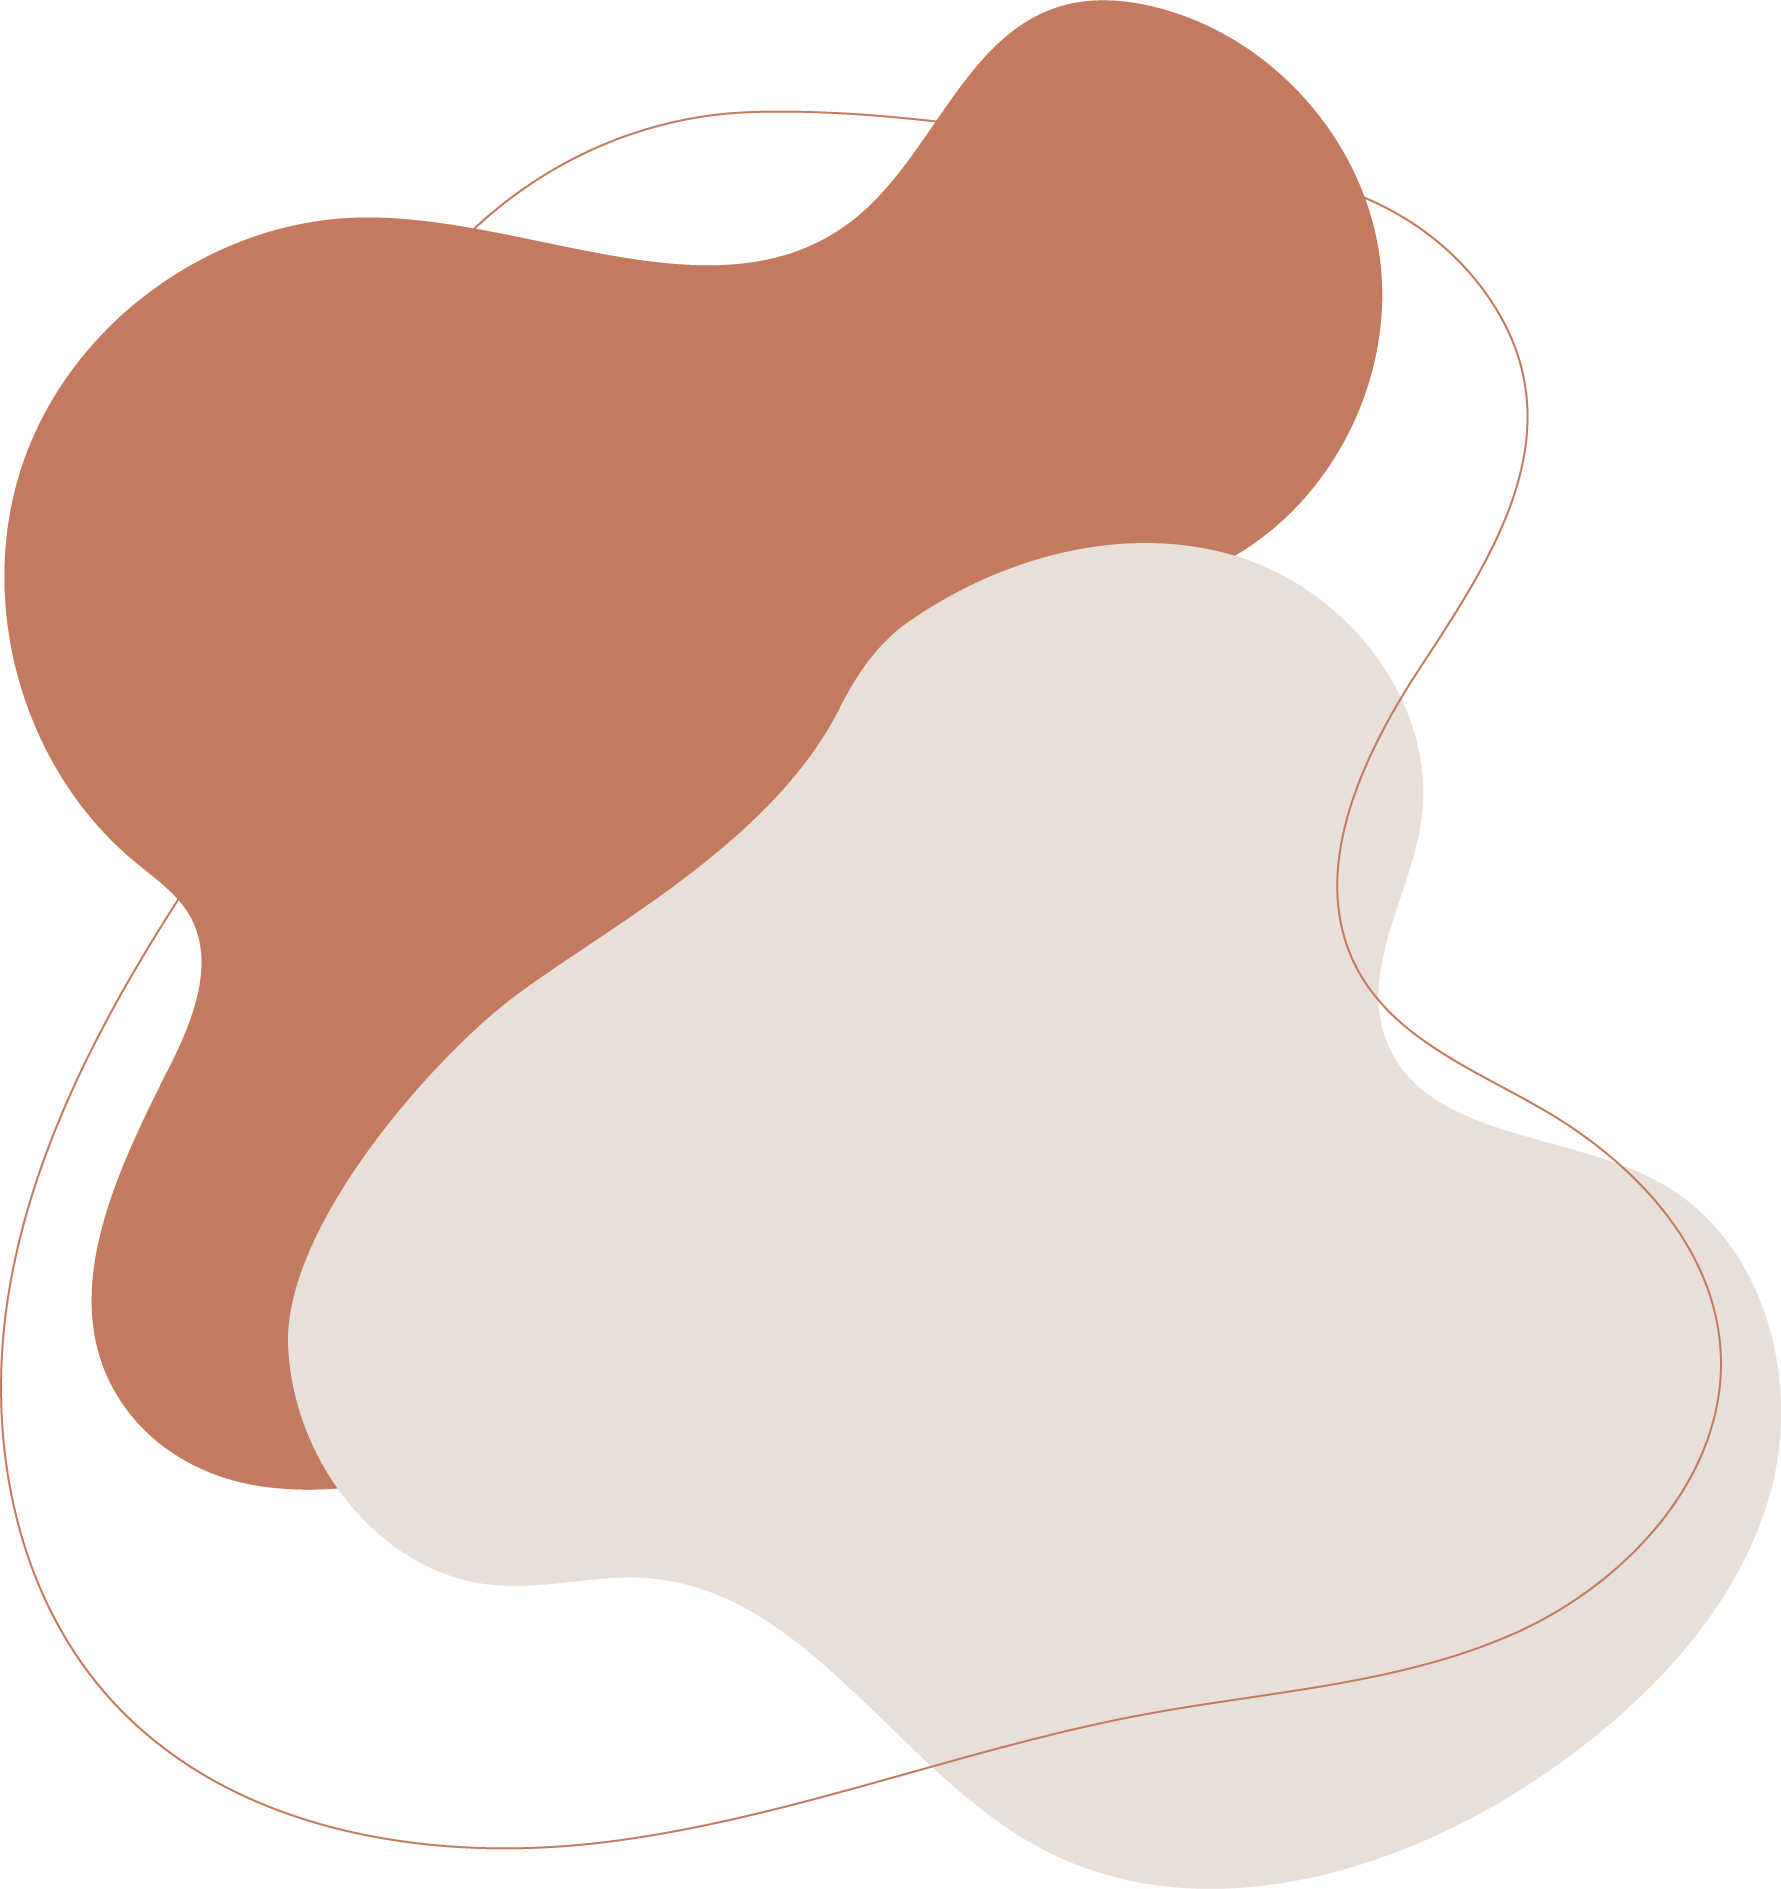 A white, orange, and beige abstract shape on a black background.